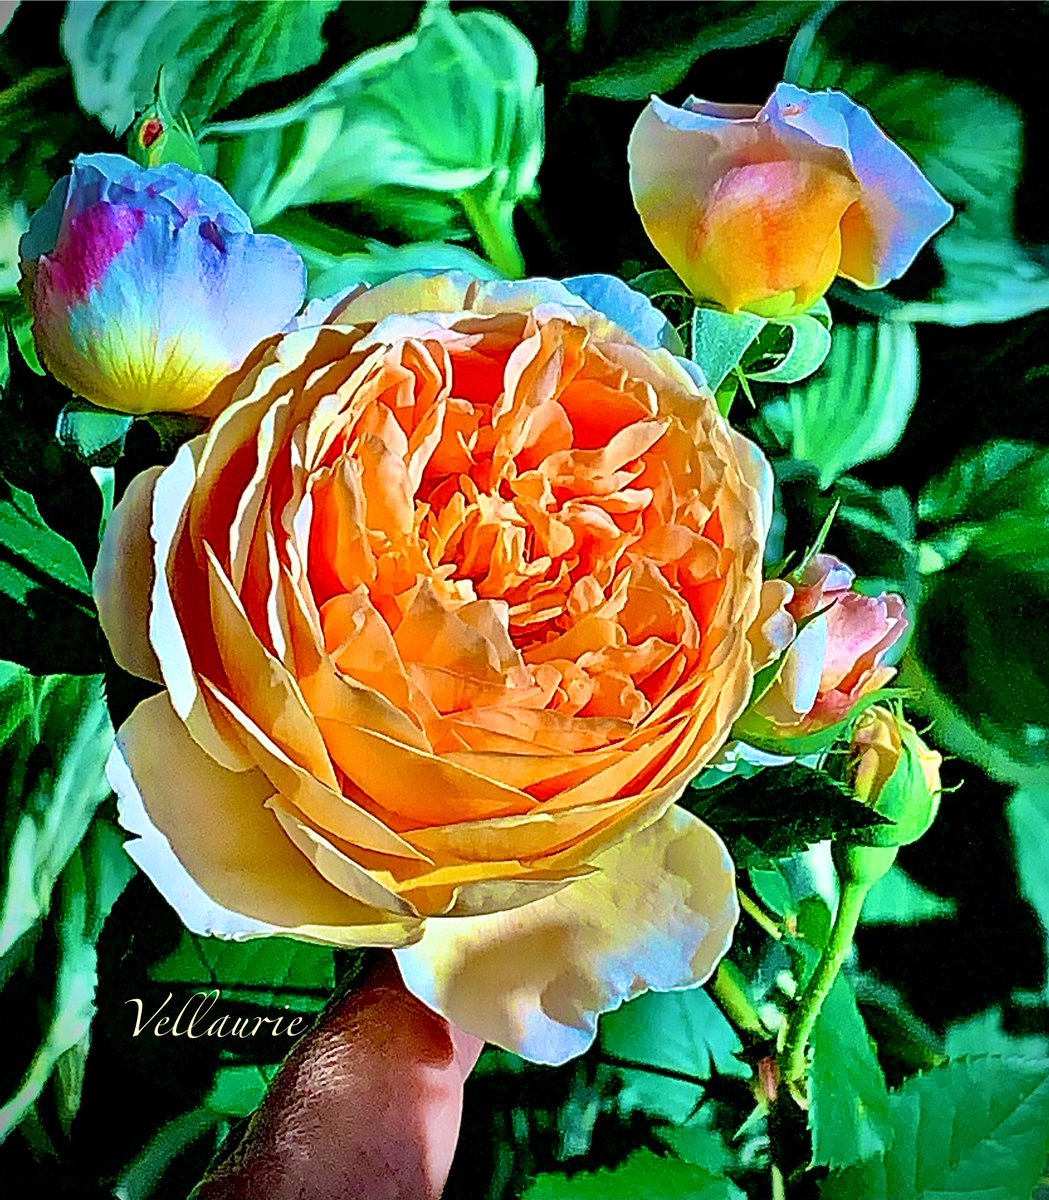 Wishing you a beautiful #RoseWednesday
“A mind might
ponder
its thought
for ages, and not
gain so much 
self knowledge as
the passion of love
shall teach it
in a day”.
-Heroism. 🕊️😊 #roselovers #mygarden #GardenersWorld #GardeningX #nature #rose